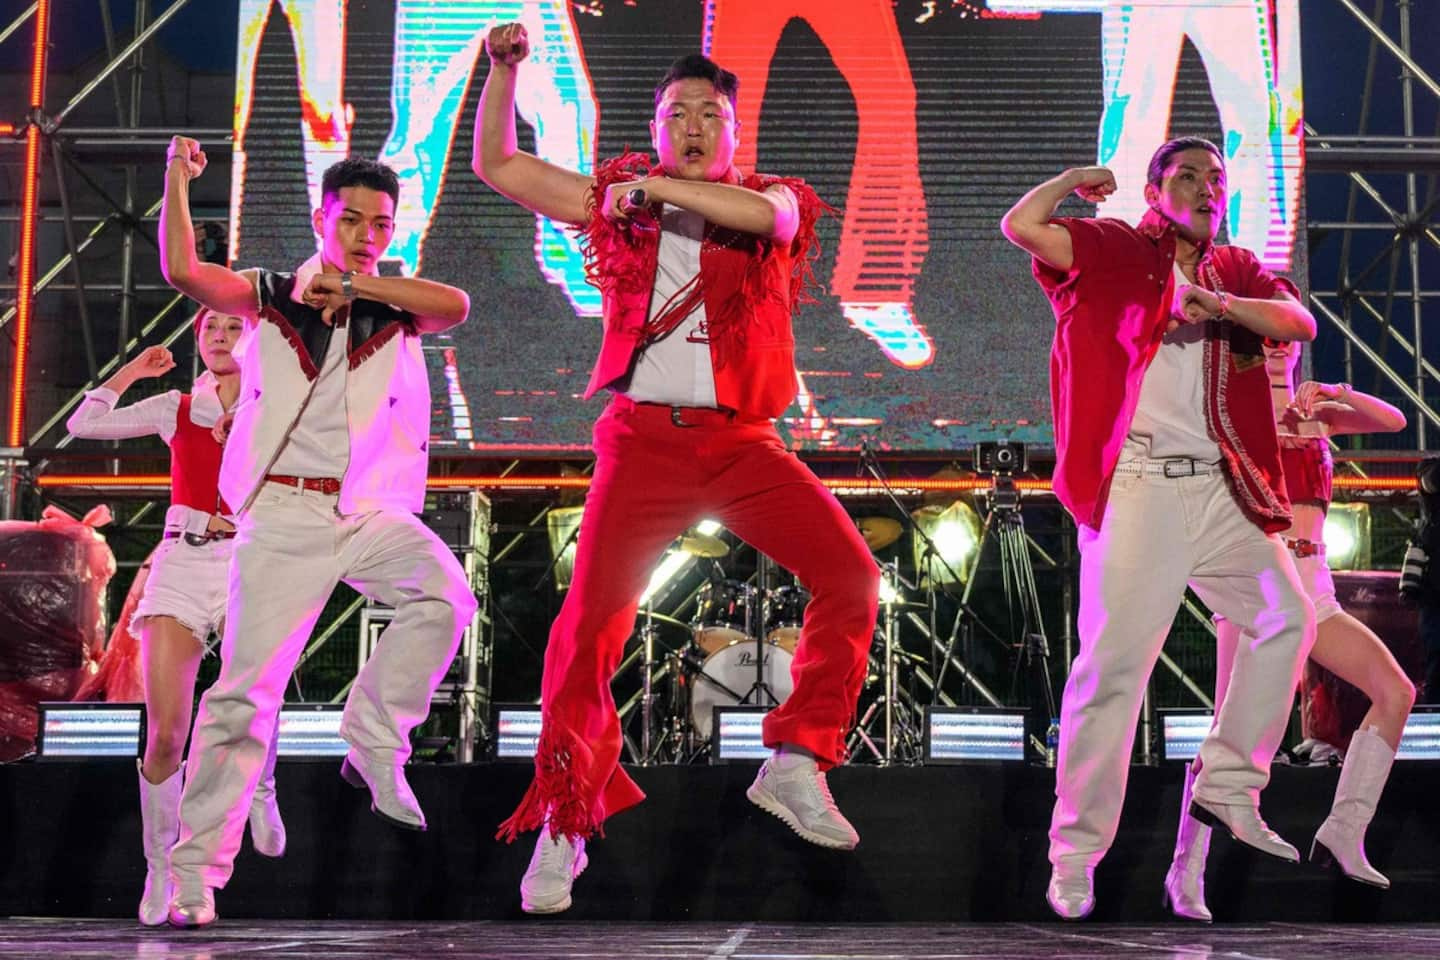 Ten years after “Gangnam Style”, the South Korean singer Psy “happier than ever”